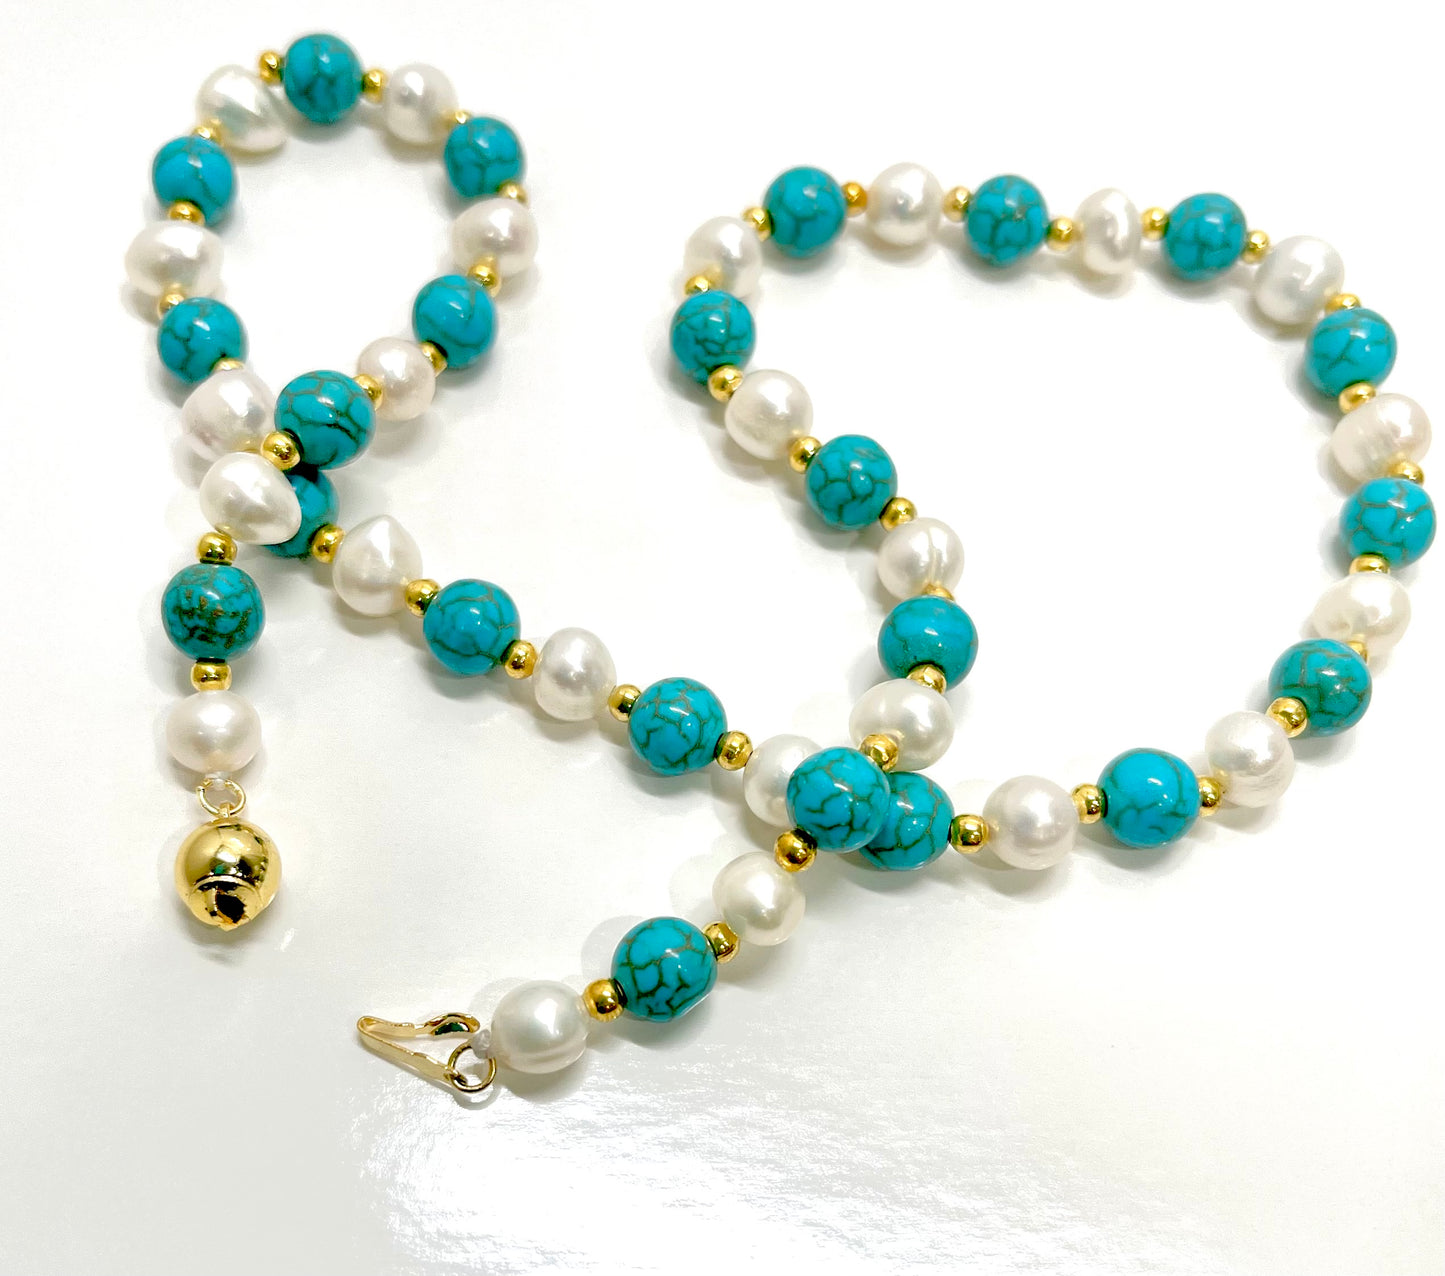 Genuine 7-8mm Natural Freshwater Pearl & Turquoise Necklace 18"